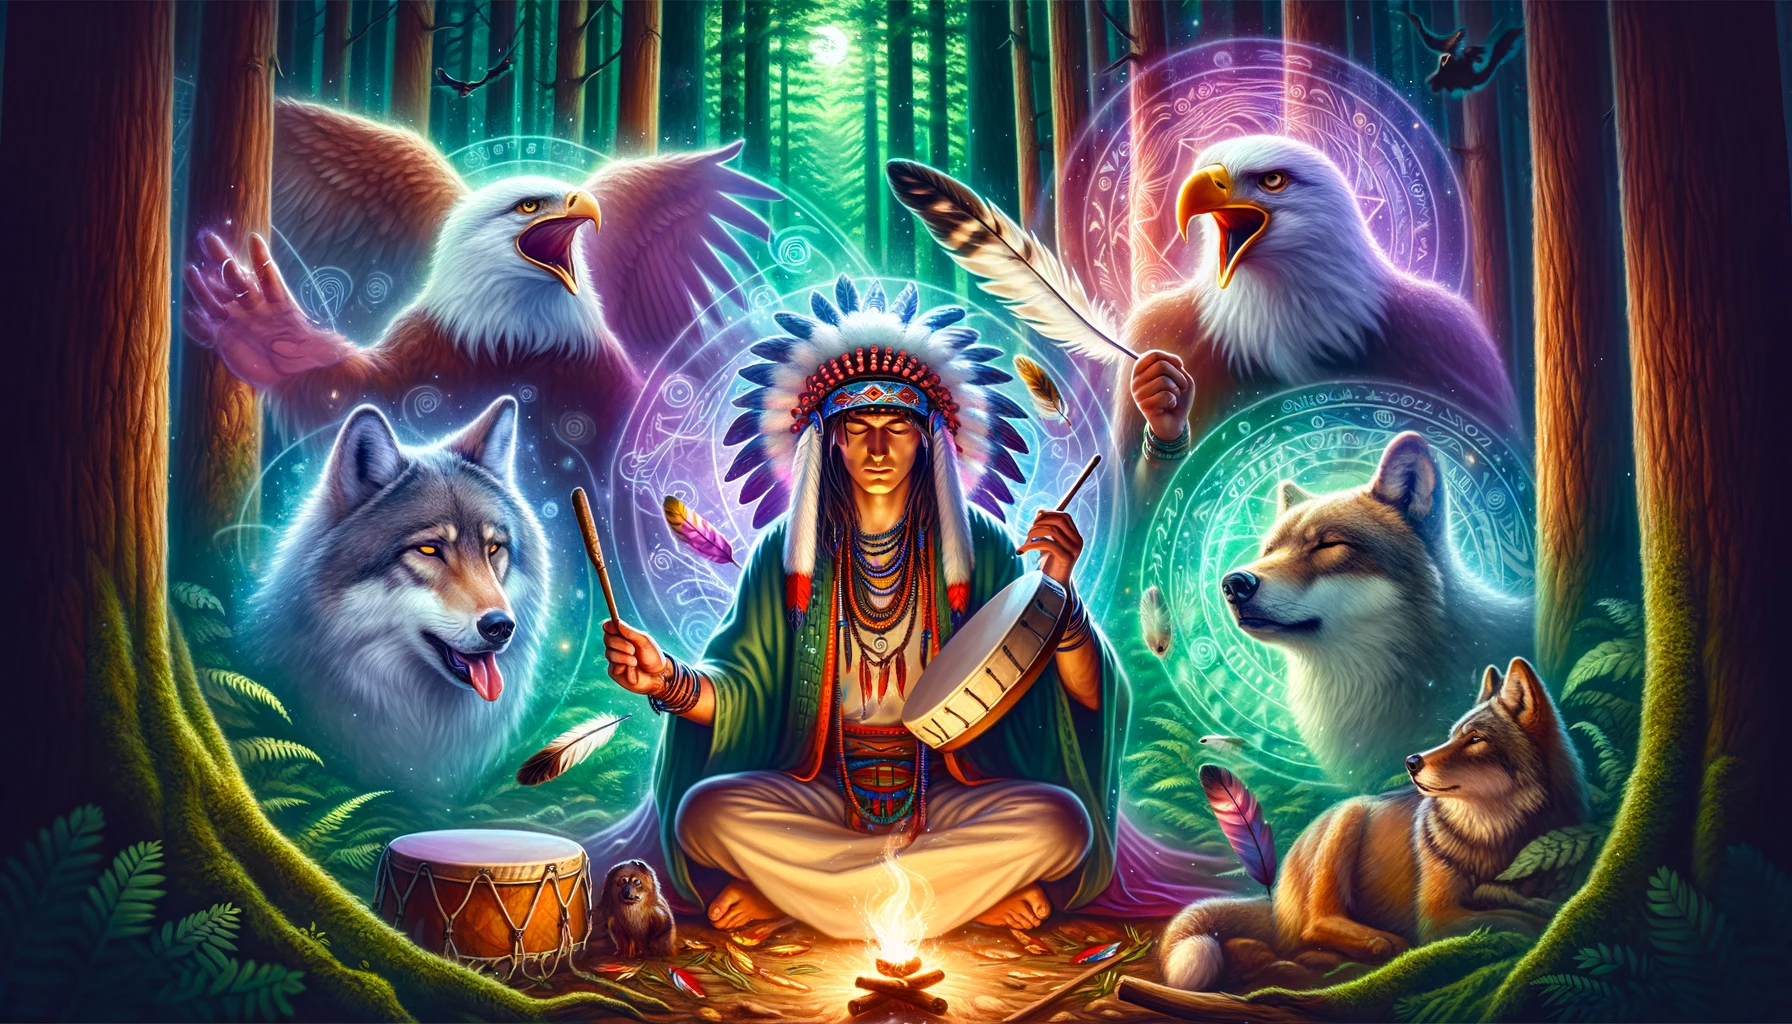 ·E 2023 11 25 14.08.09   A mystical and vibrant illustration of a shaman in traditional attire performing a ritual in a forest, surrounded by various animal spirits such as an.png